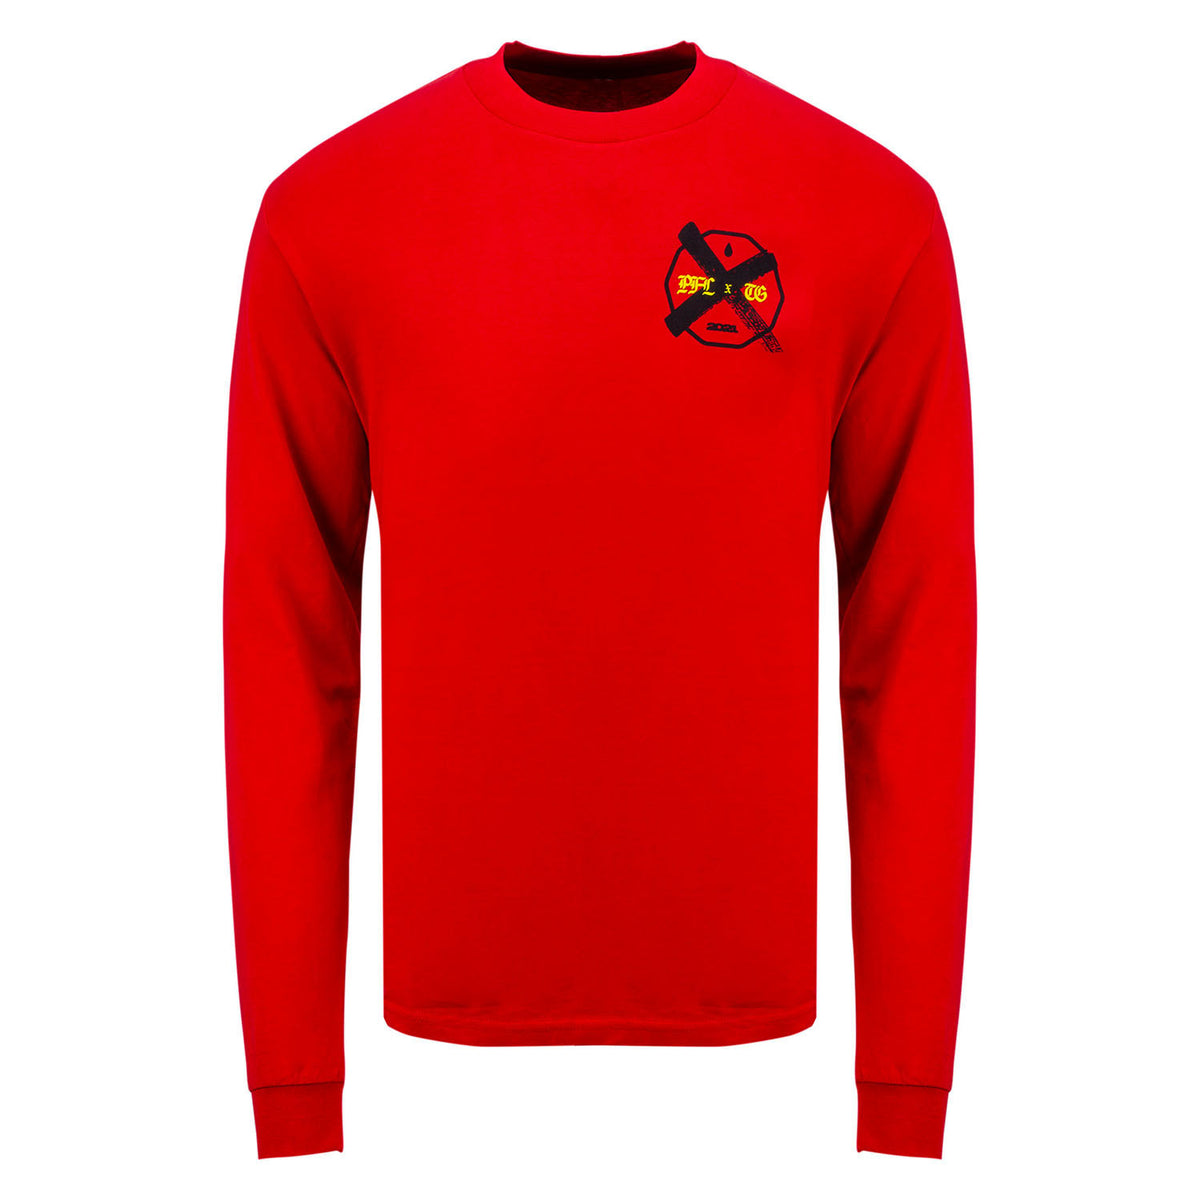 Taylor Gang x PFL “Step Into The Cage” Long-Sleeve in Red - Front View